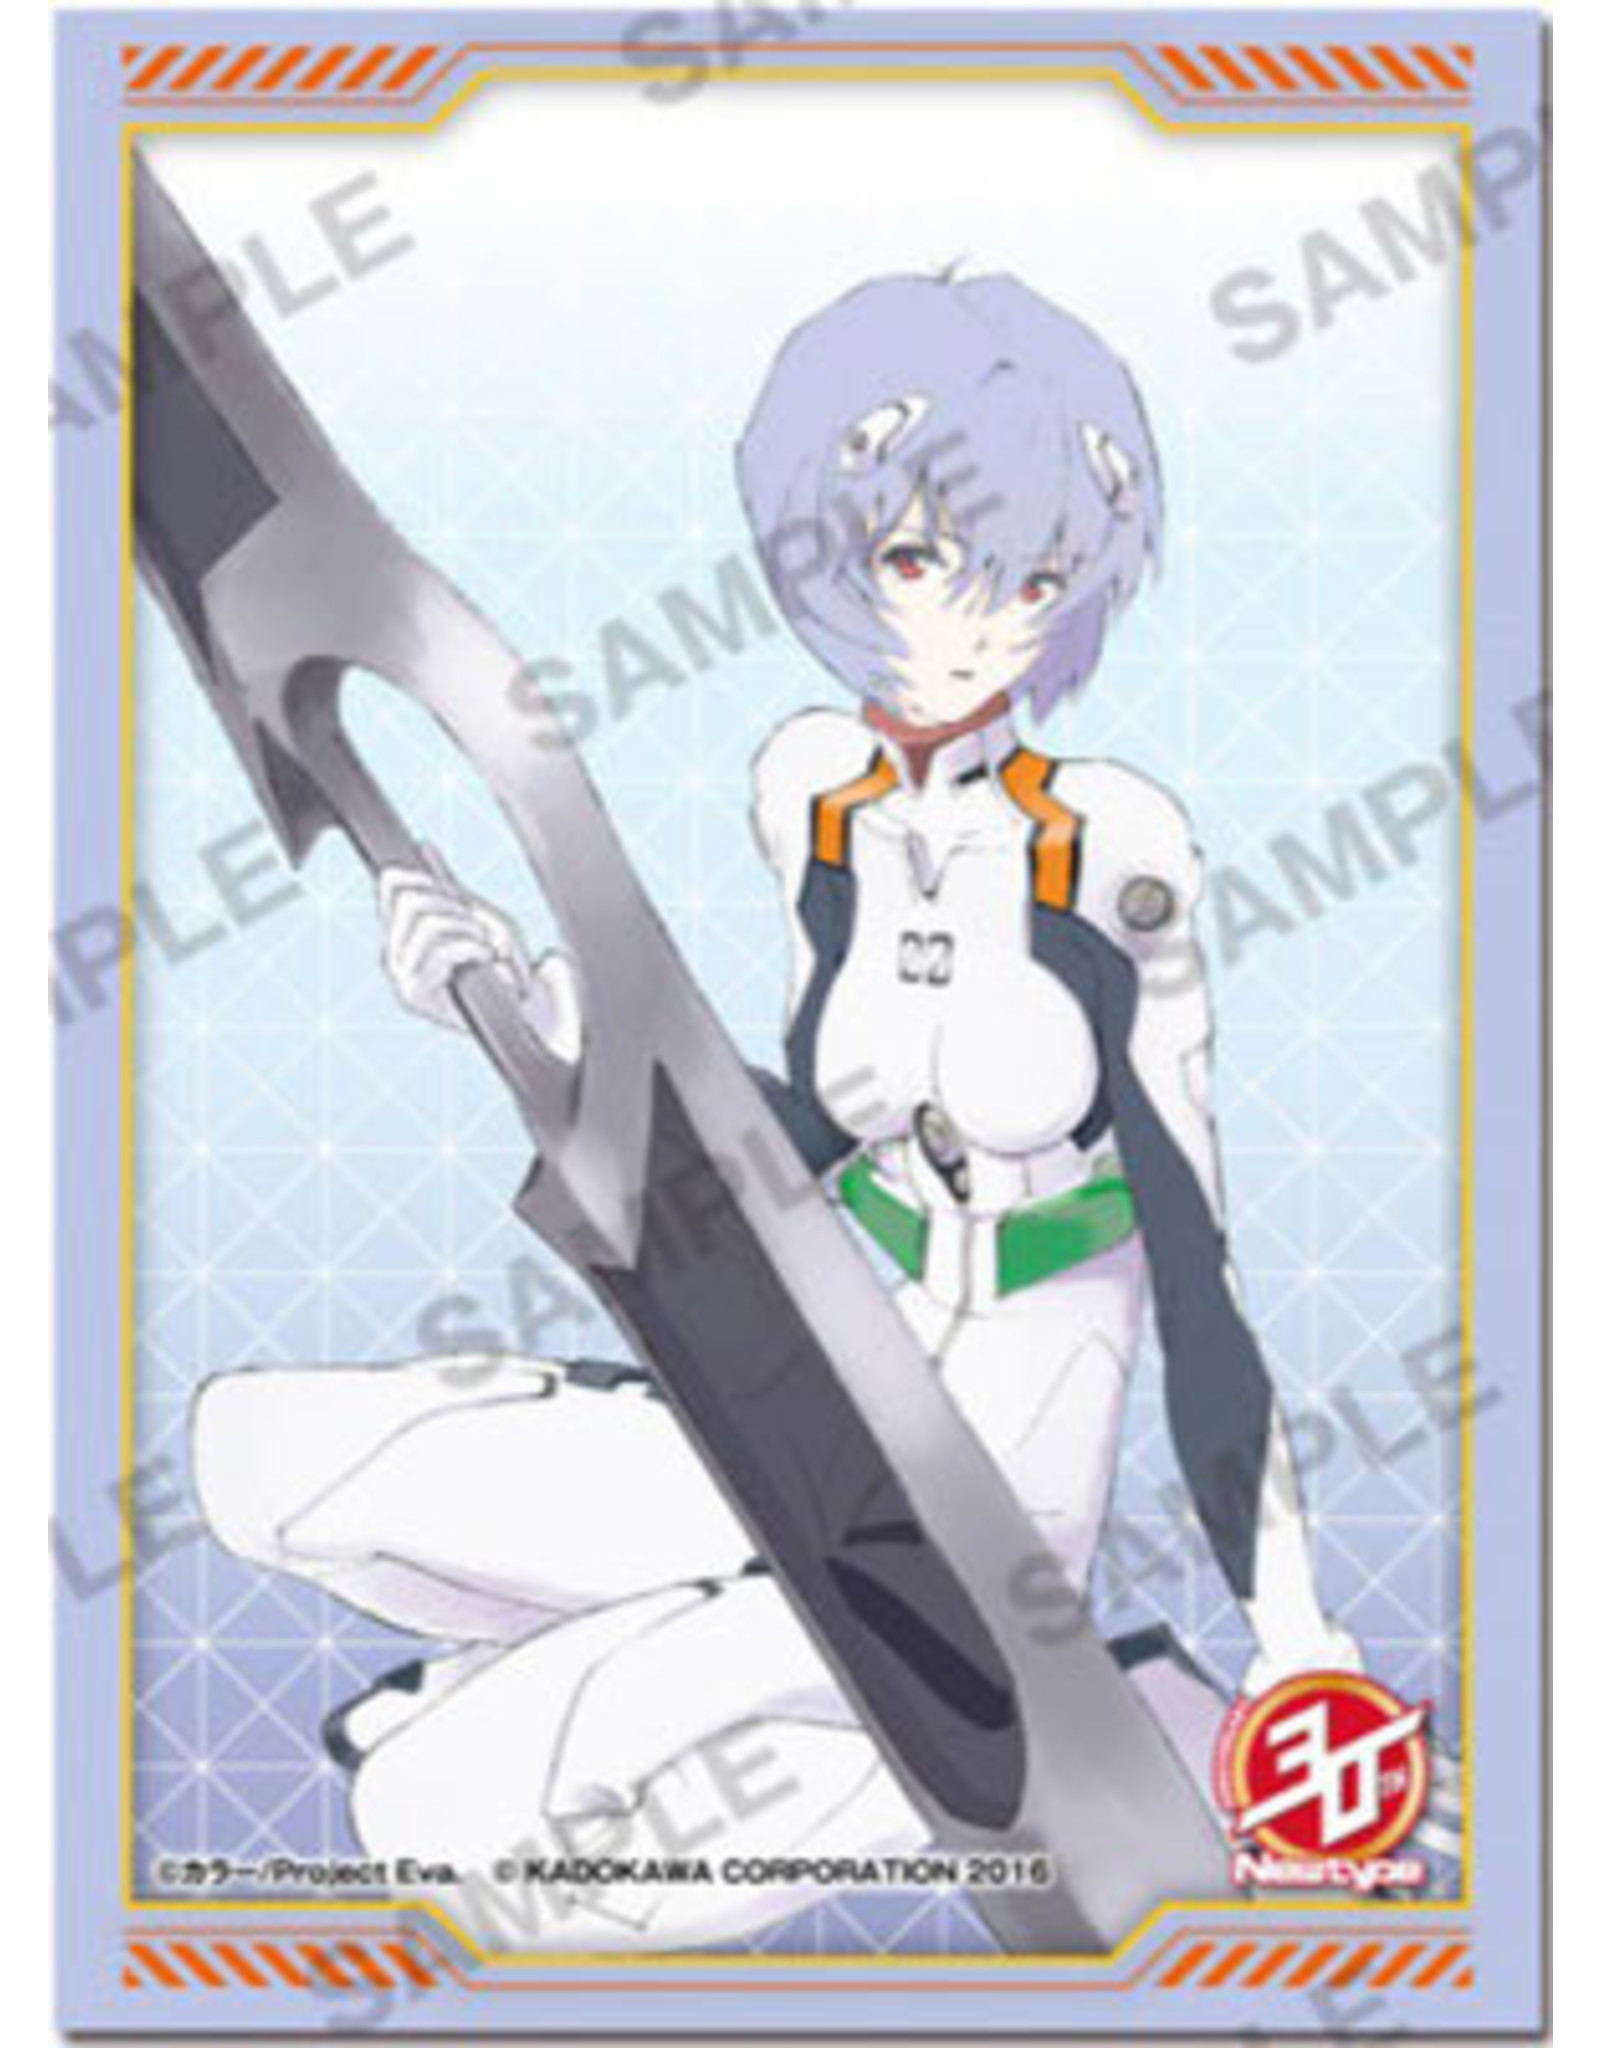 Newtype 30th Anniversary Evangelion Rei Ayanami Character Sleeves